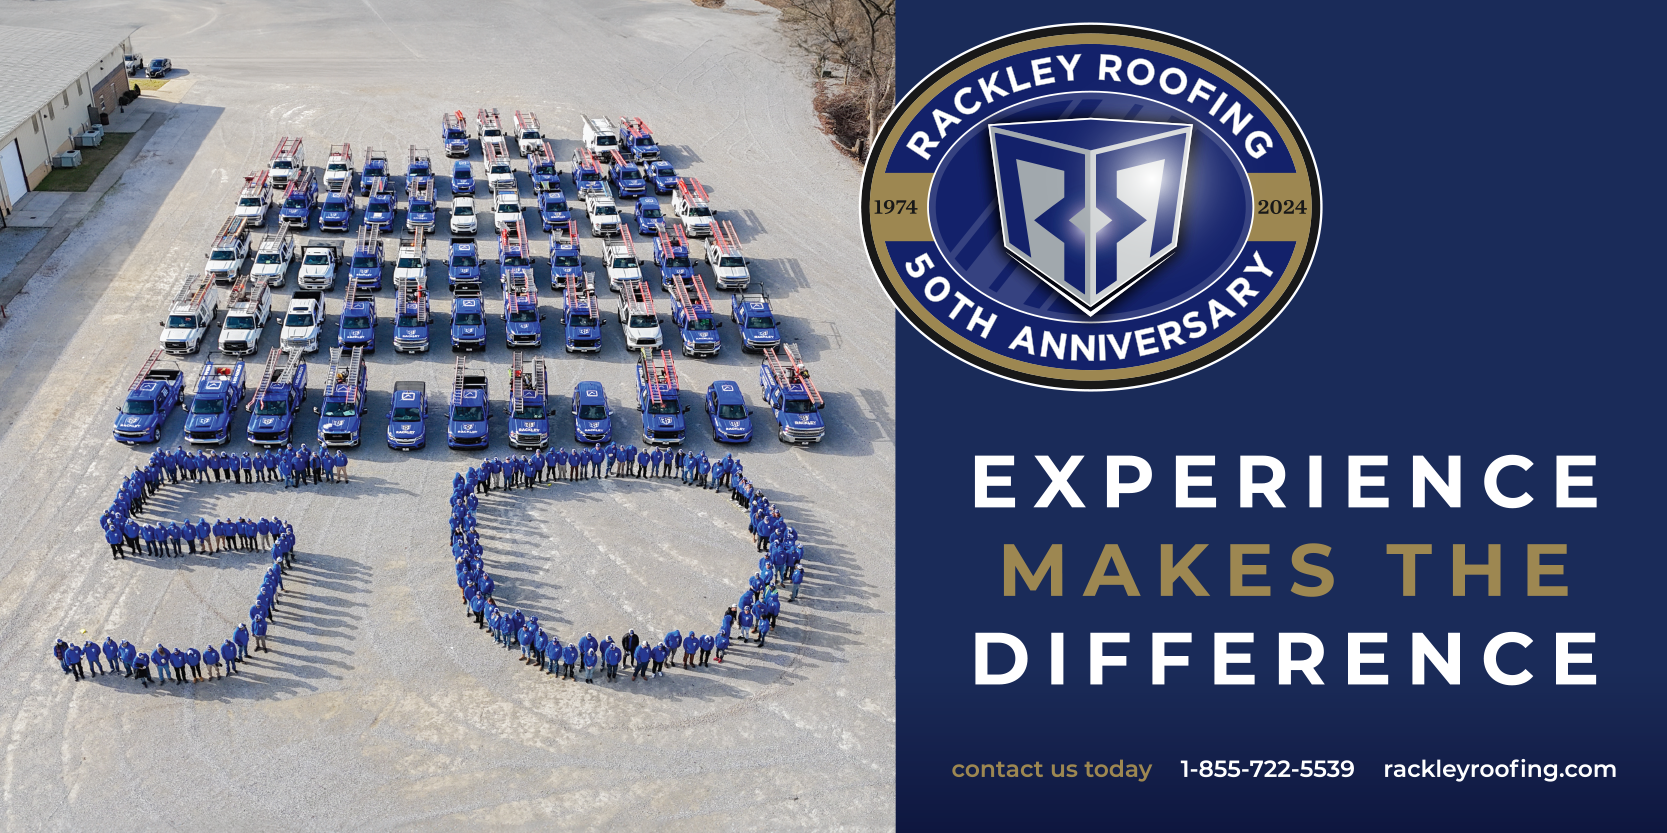 Rackley Roofing Celebrates 50 Years